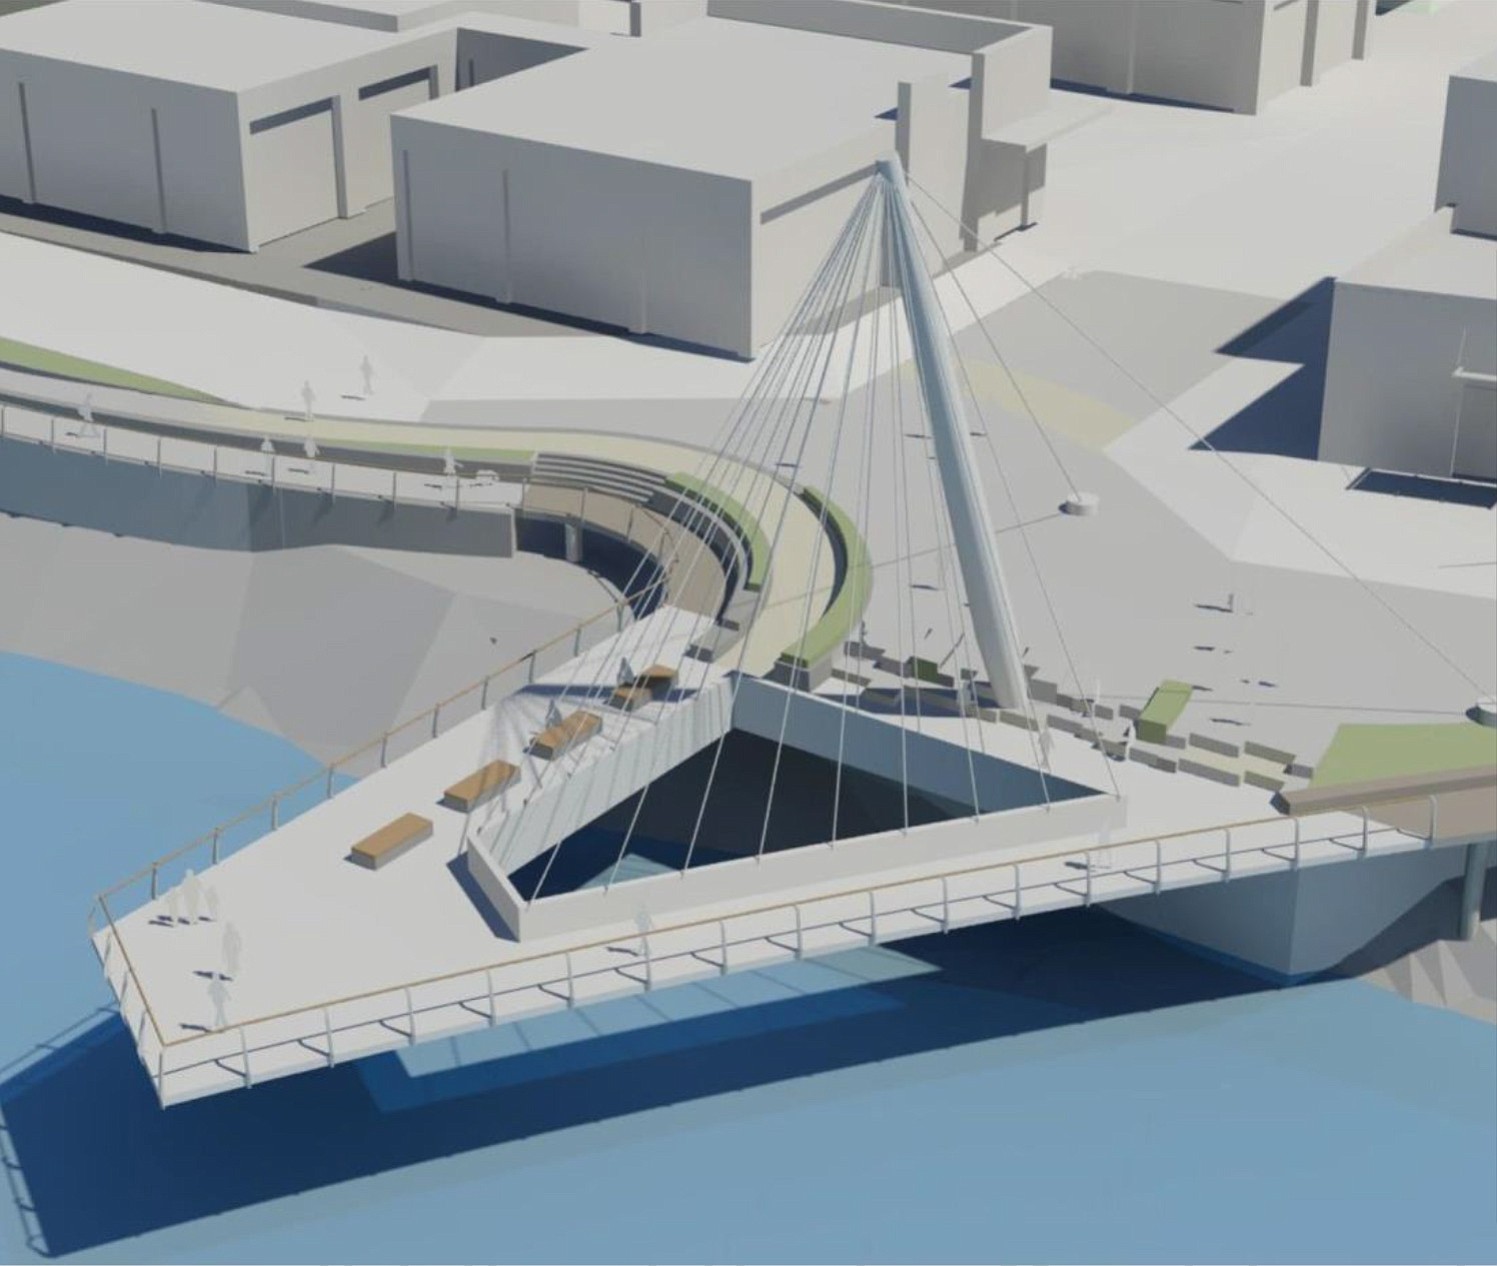 Courtesy of Larry Kirkland
A suspended pier on Vancouver's waterfront would have a surface 19 to 20 feet above the Columbia River.